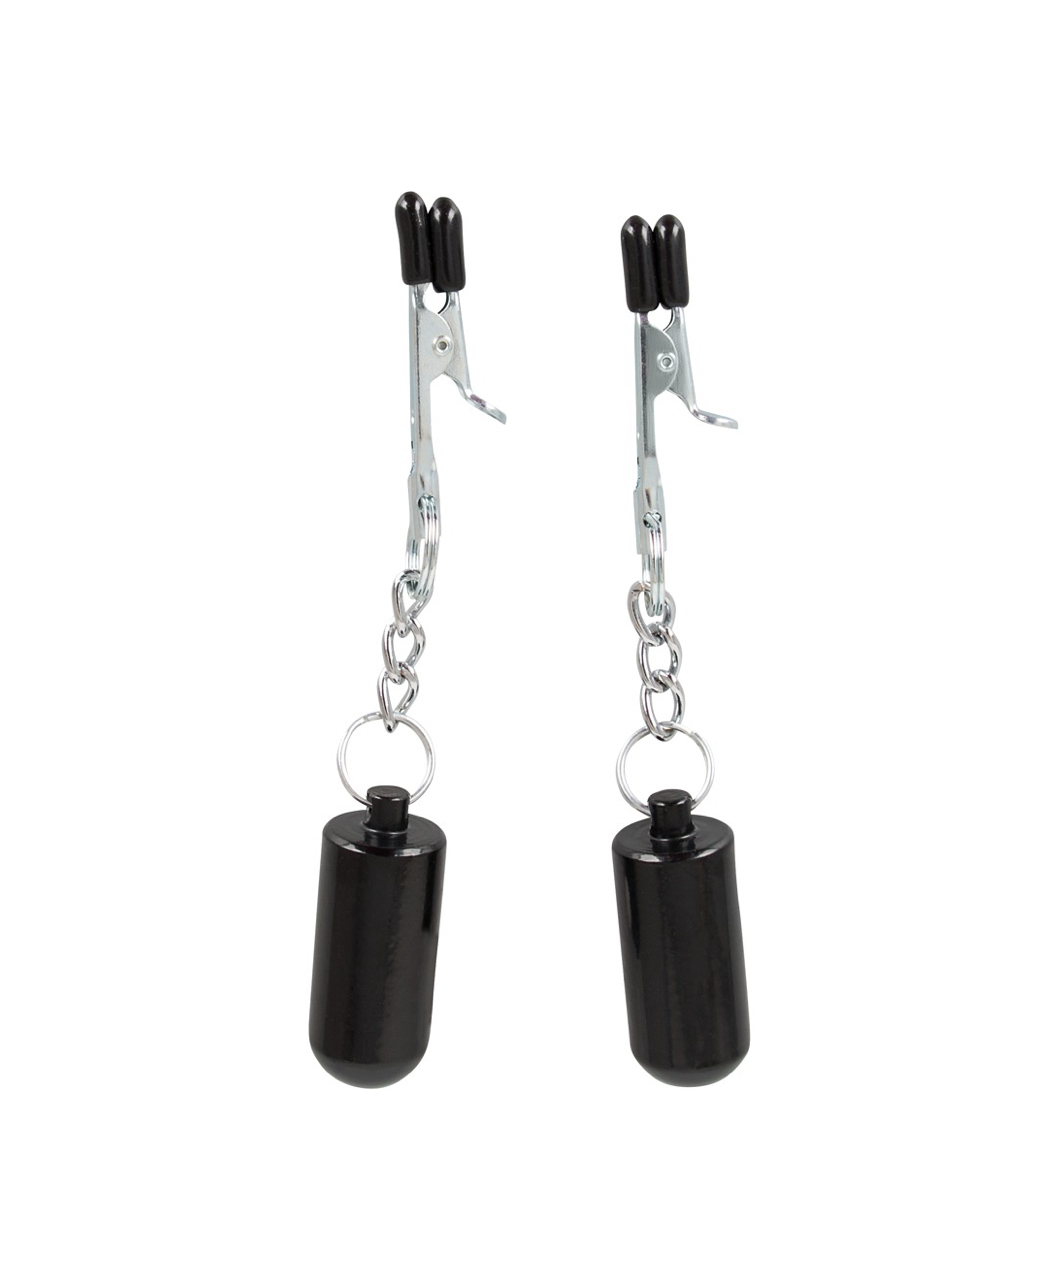 Sextreme nipple clamps with weights